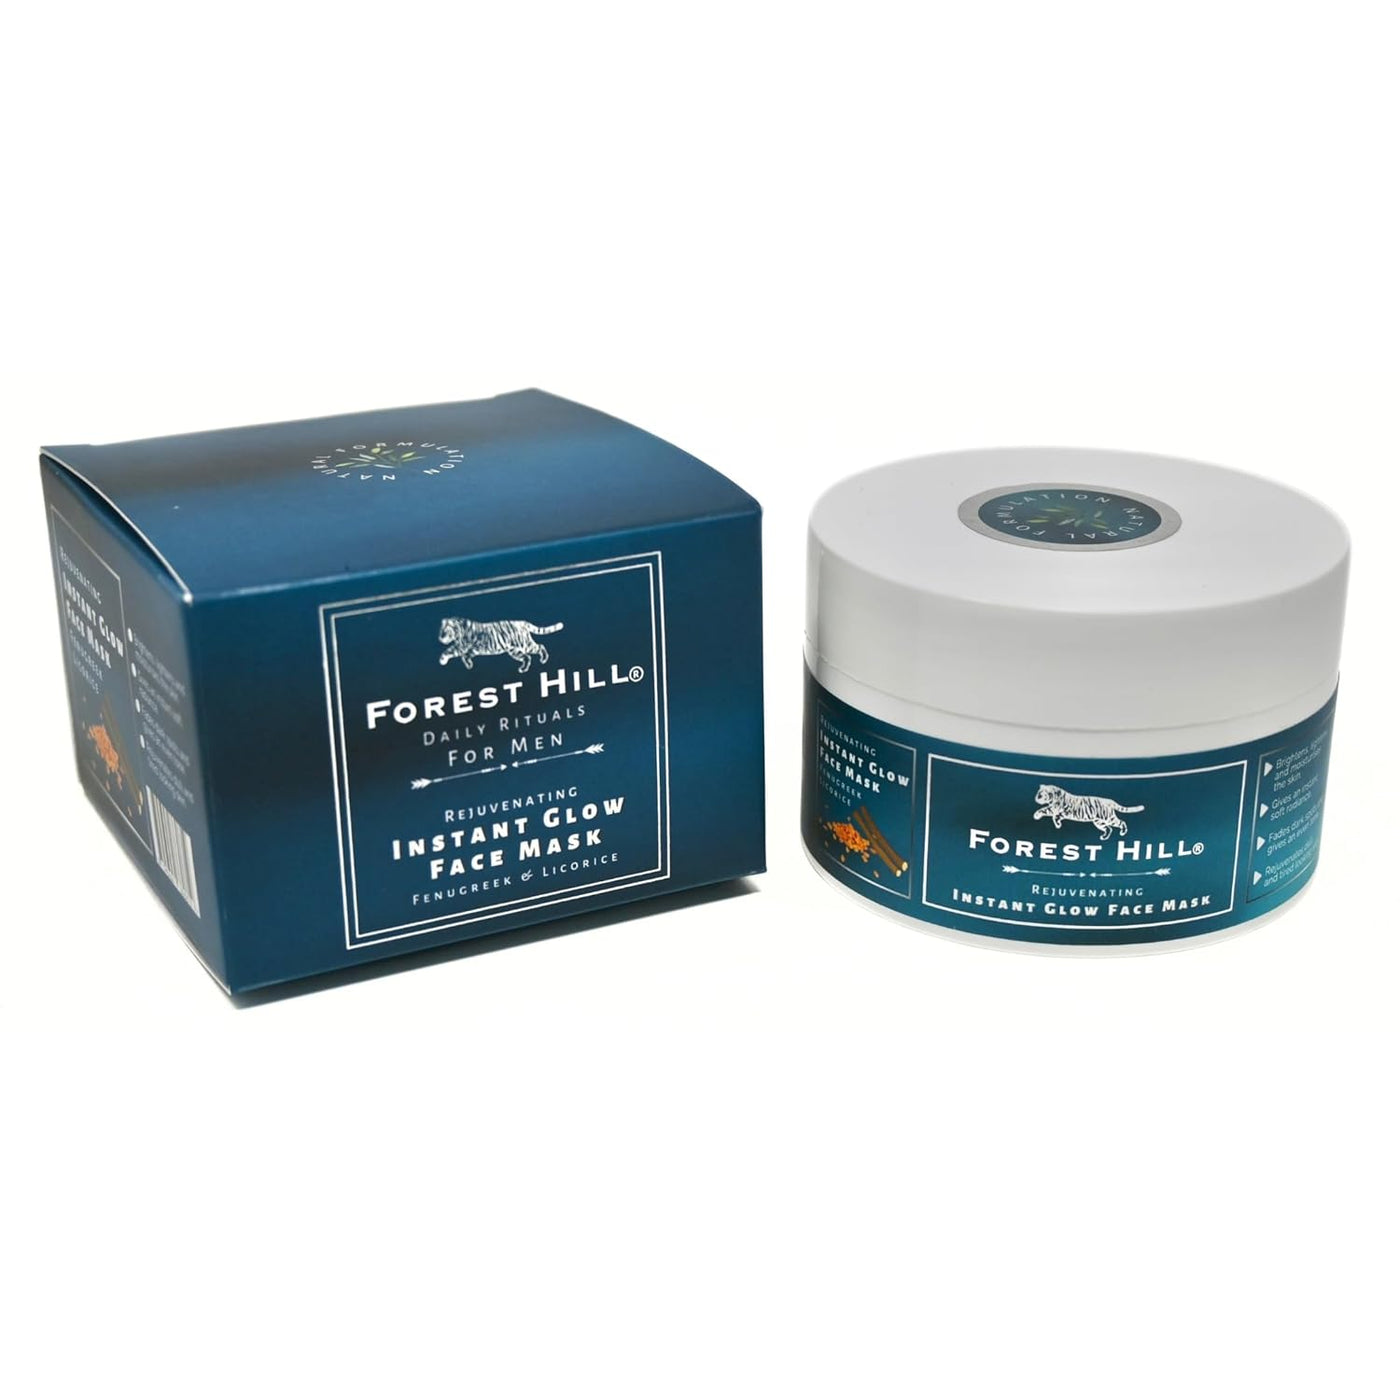 Forest Hill instant glow face mask for men, 100g